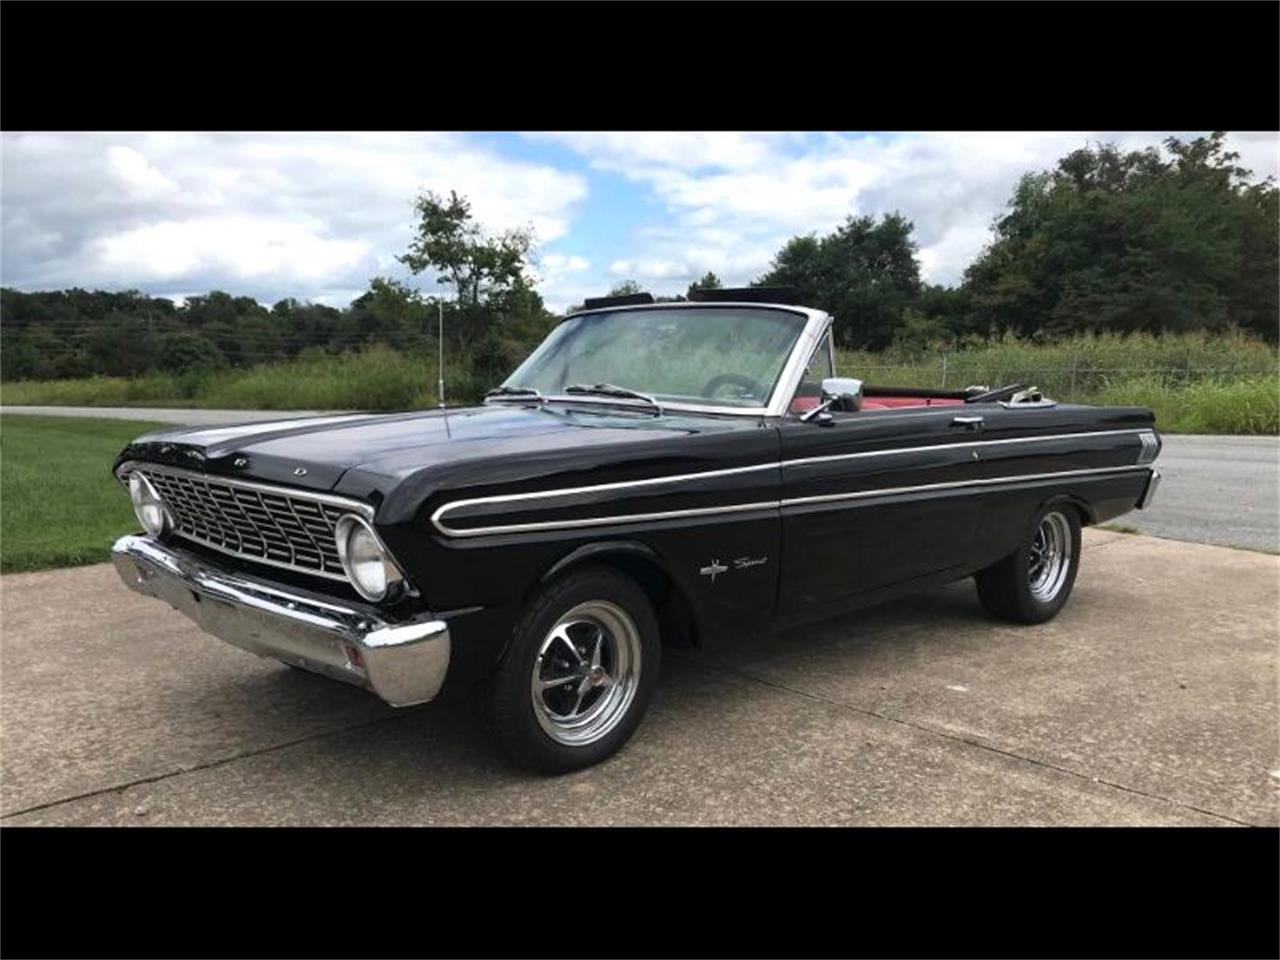 For Sale: 1964 Ford Falcon in Harpers Ferry, West Virginia for sale in Harpers Ferry, WV